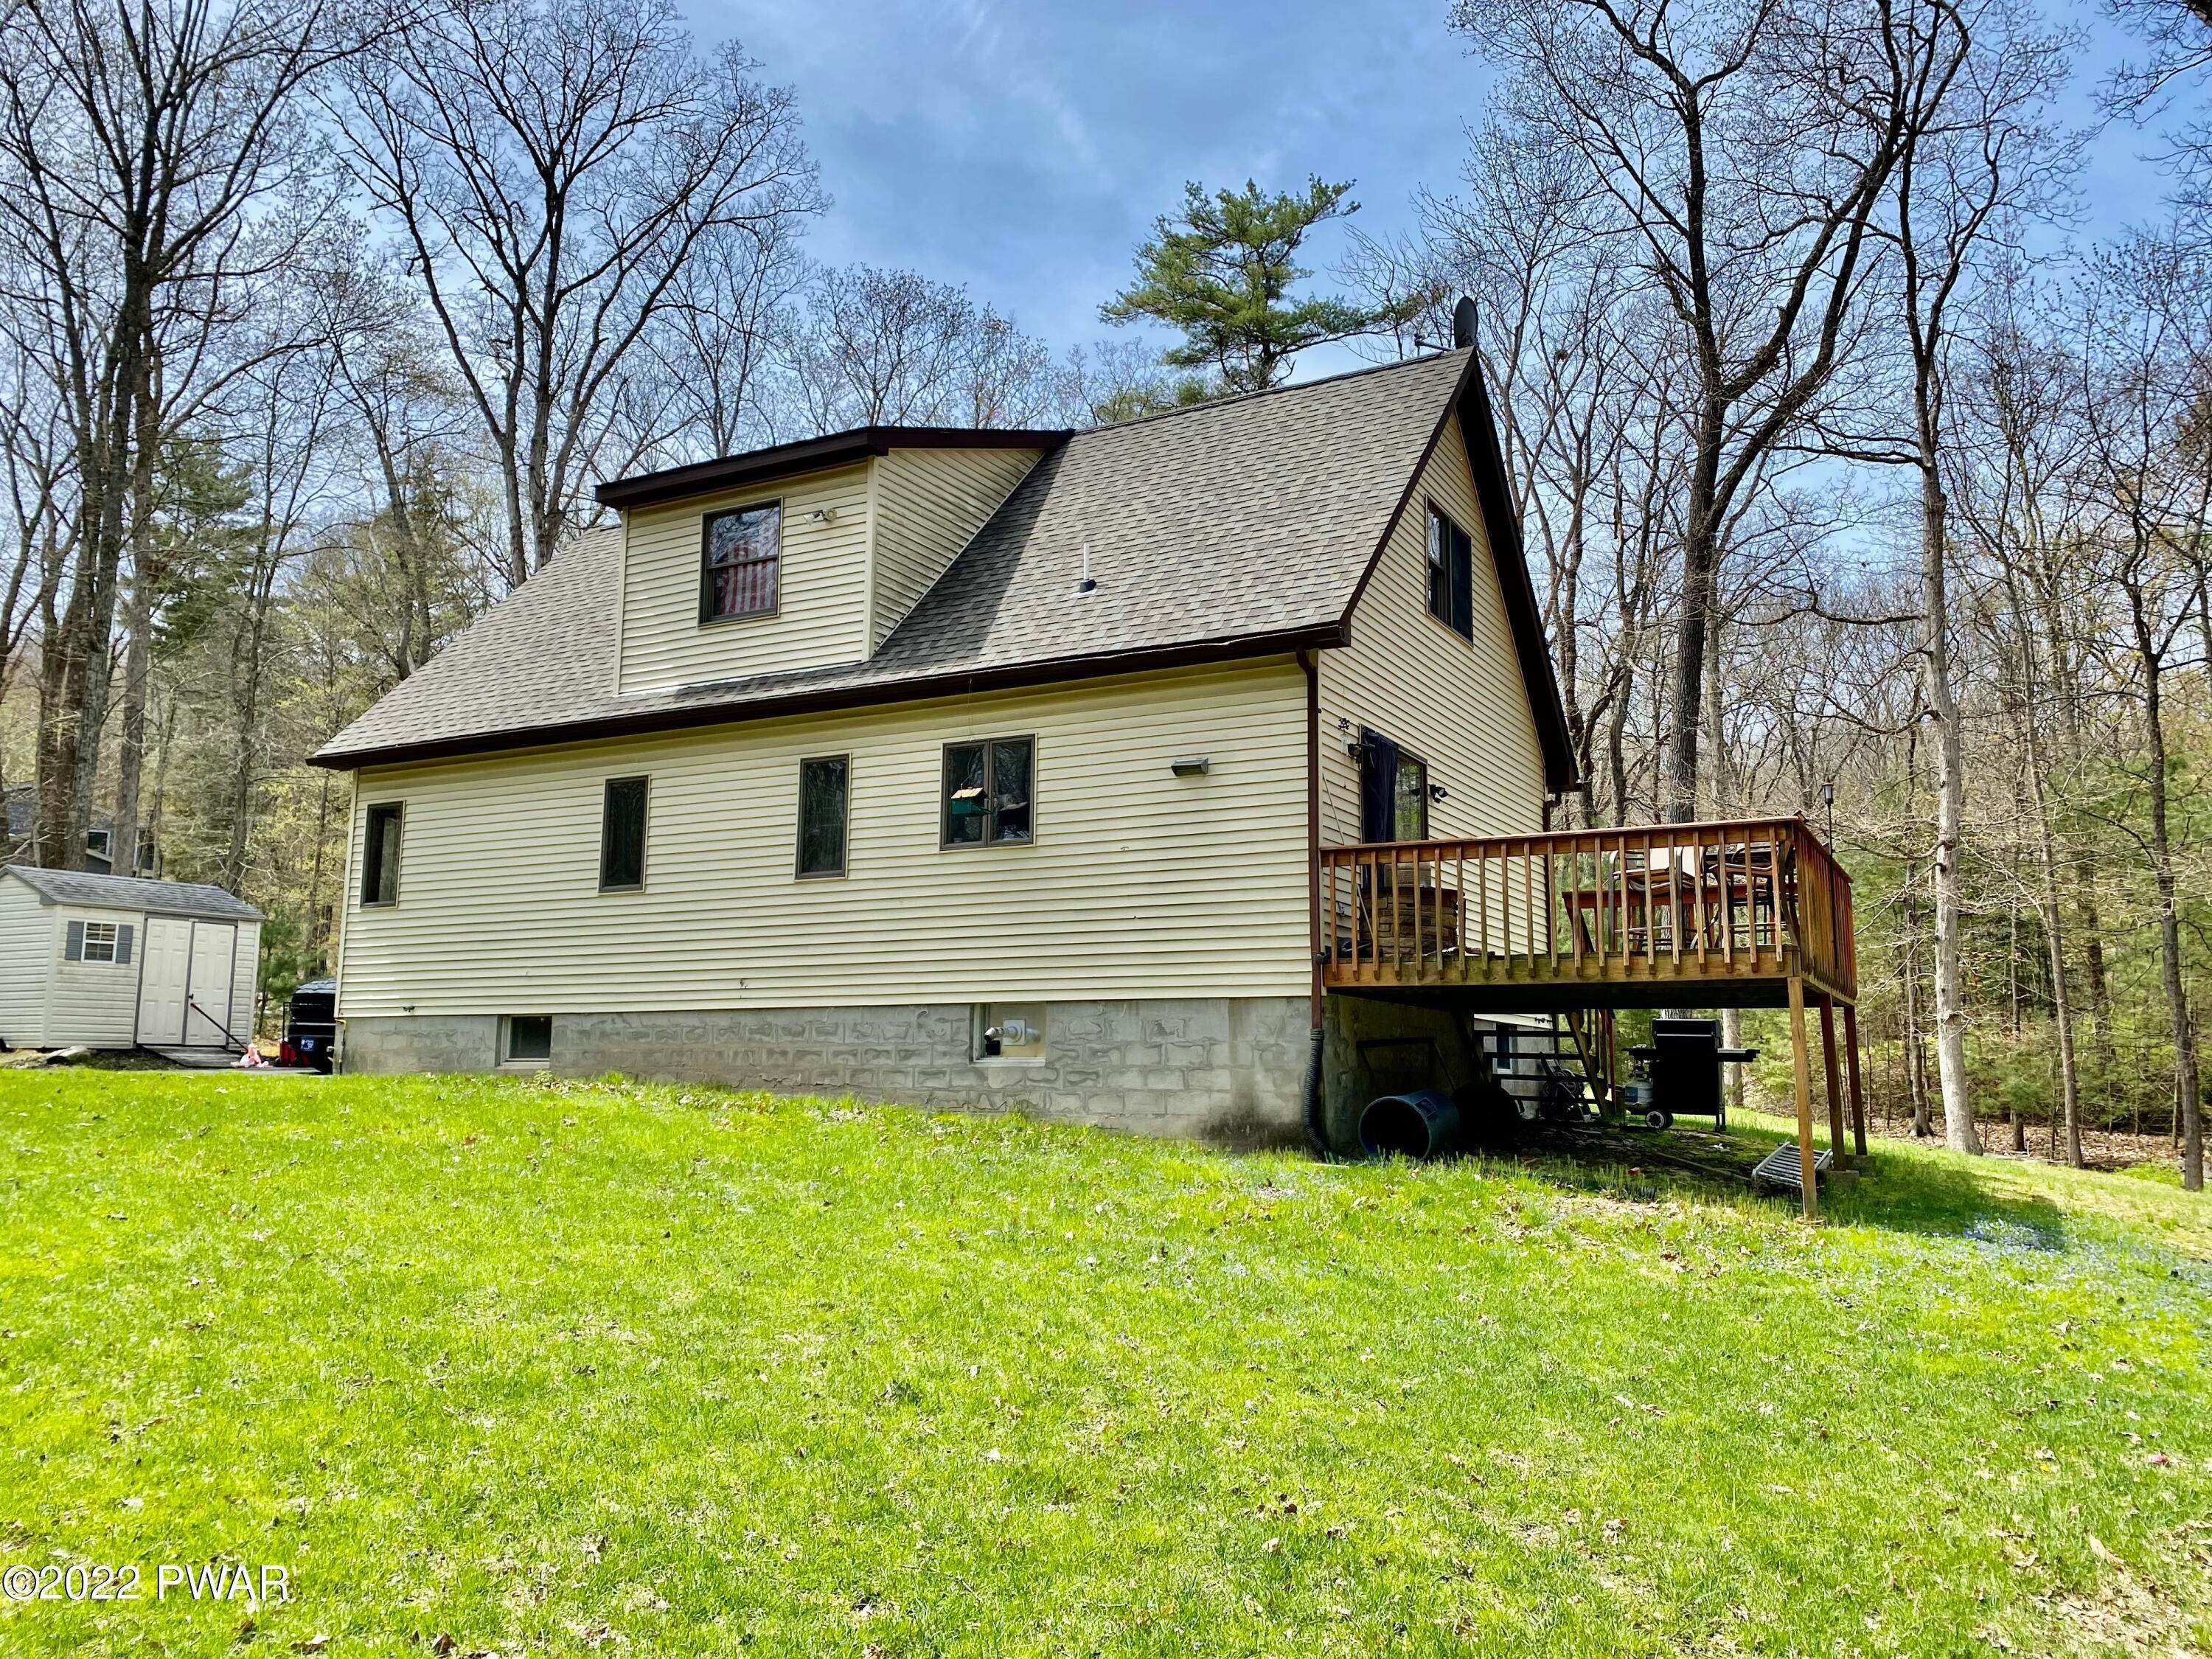 31. Single Family Homes for Sale at 106 Edwards Ct Matamoras, Pennsylvania 18336 United States